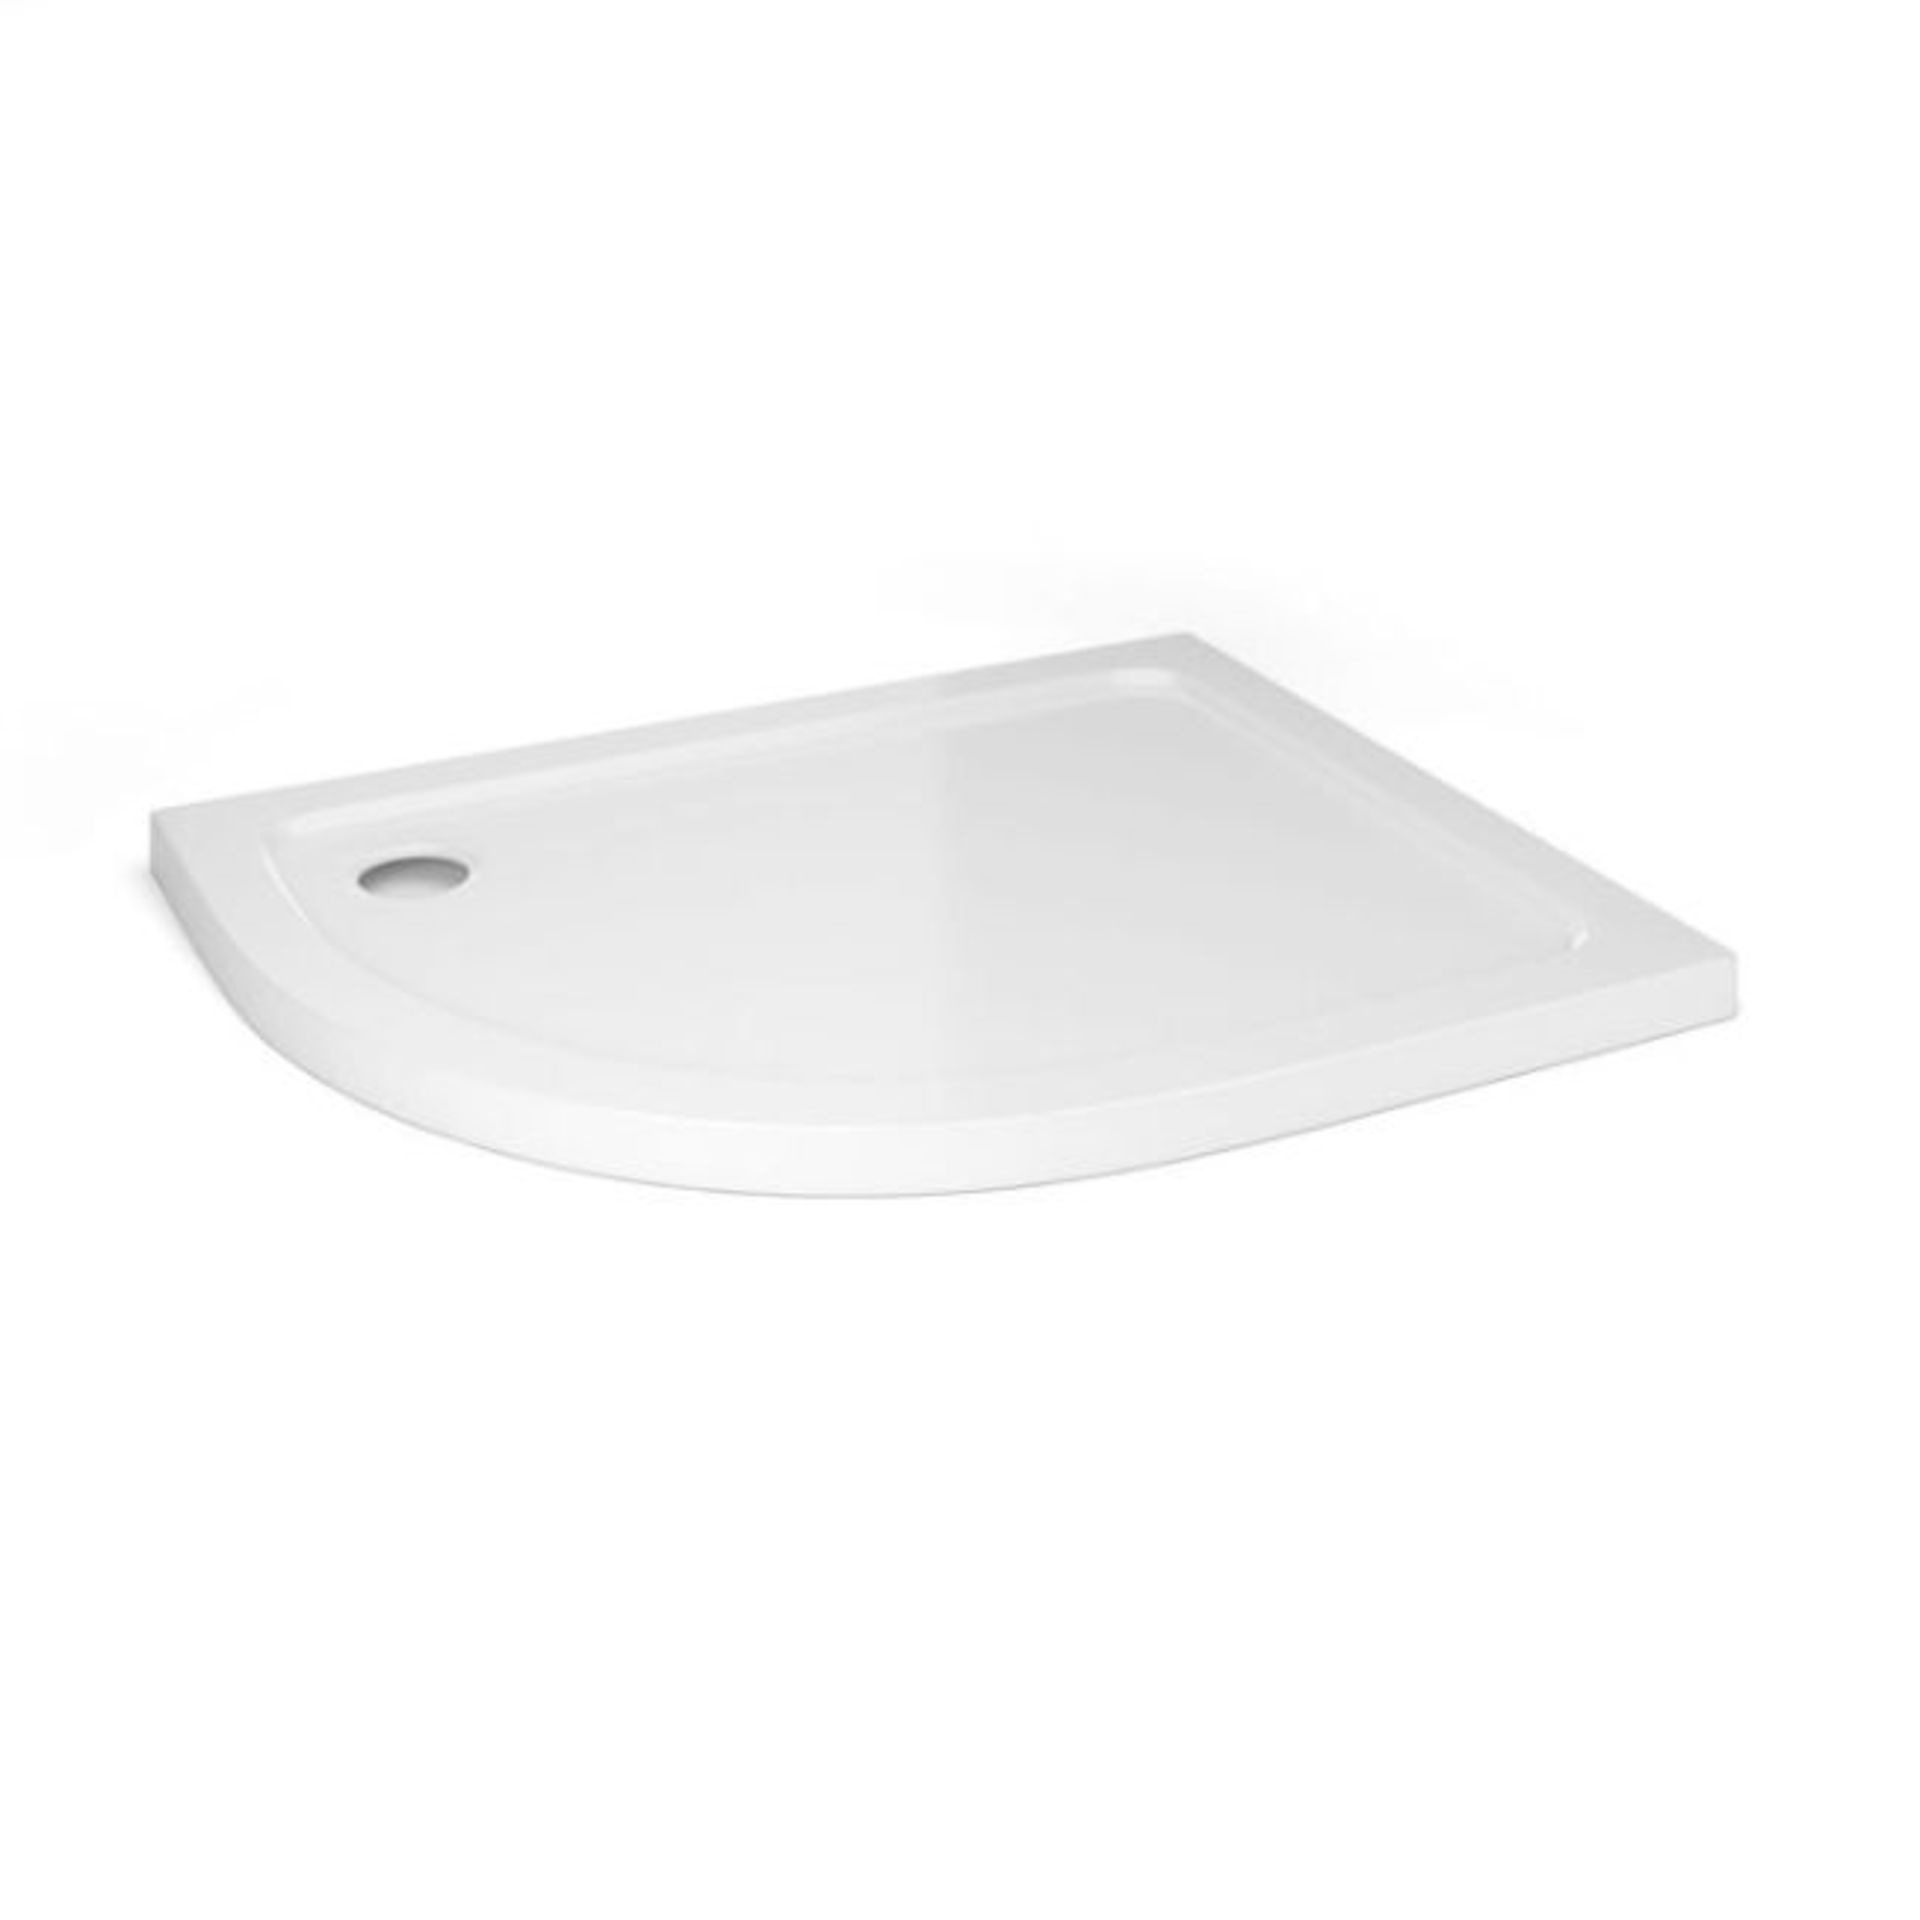 New (NY19) 1000x800mm Offset Quadrant Ultra Slim Stone Shower Tray - Left. Constructed from... - Image 2 of 2